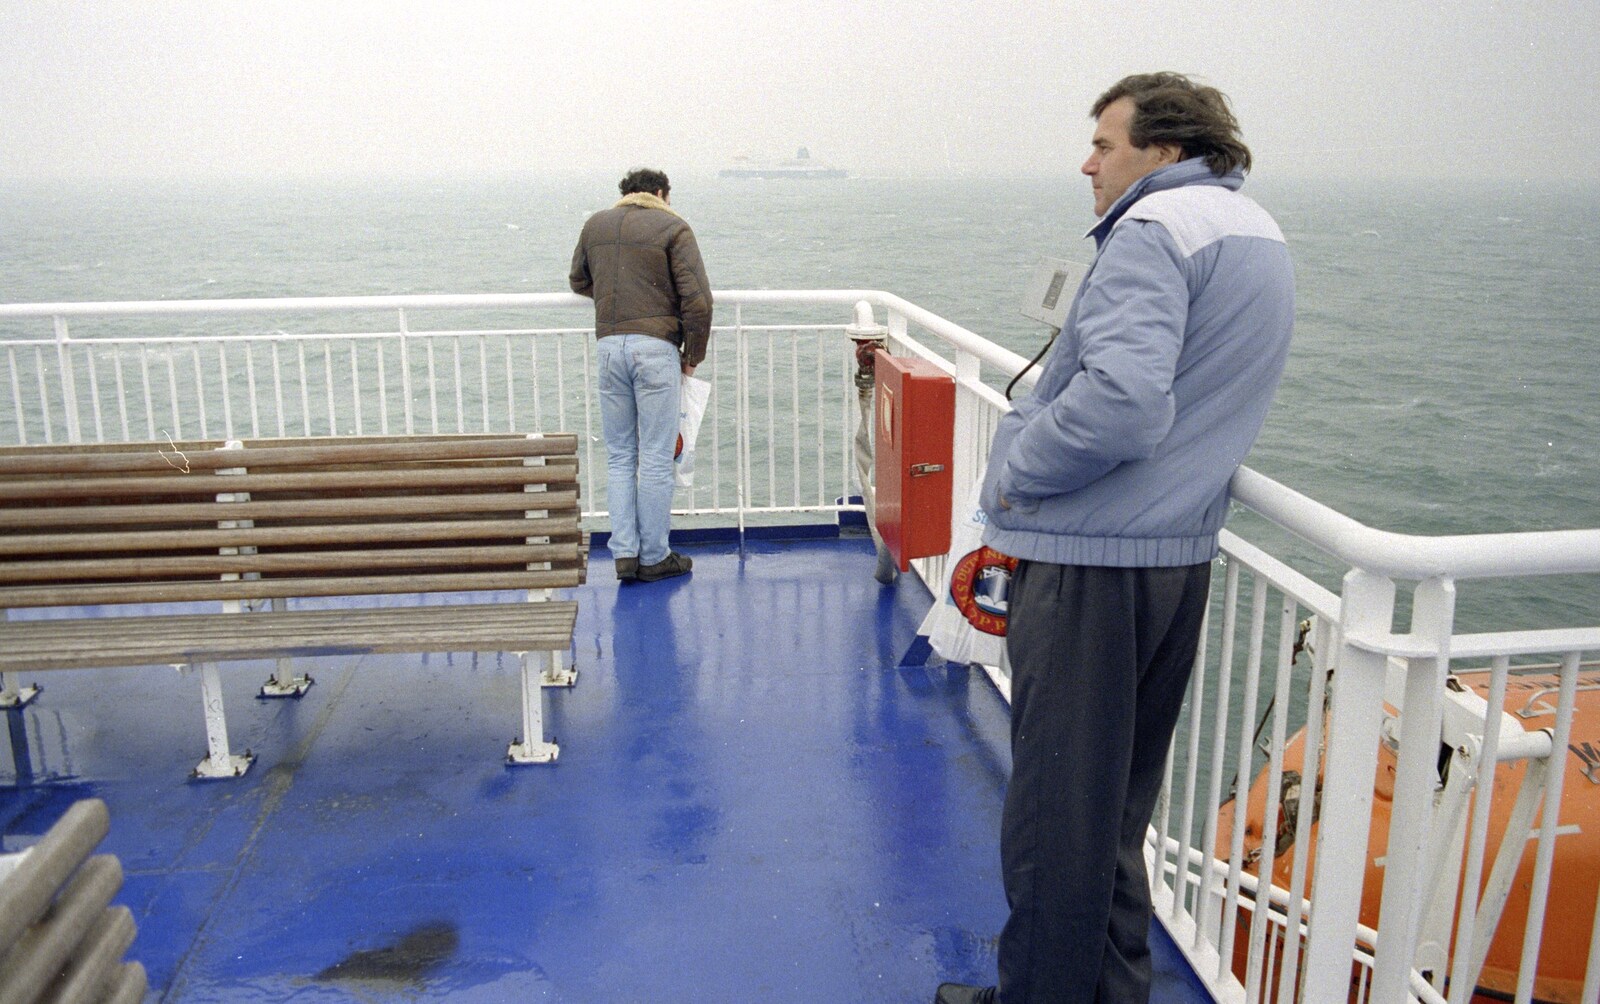 Alan looks out to sea as DH peers over the side from The CISU Internet Team, Bedroom Building and Ferries, Suffolk - 16th February 1996